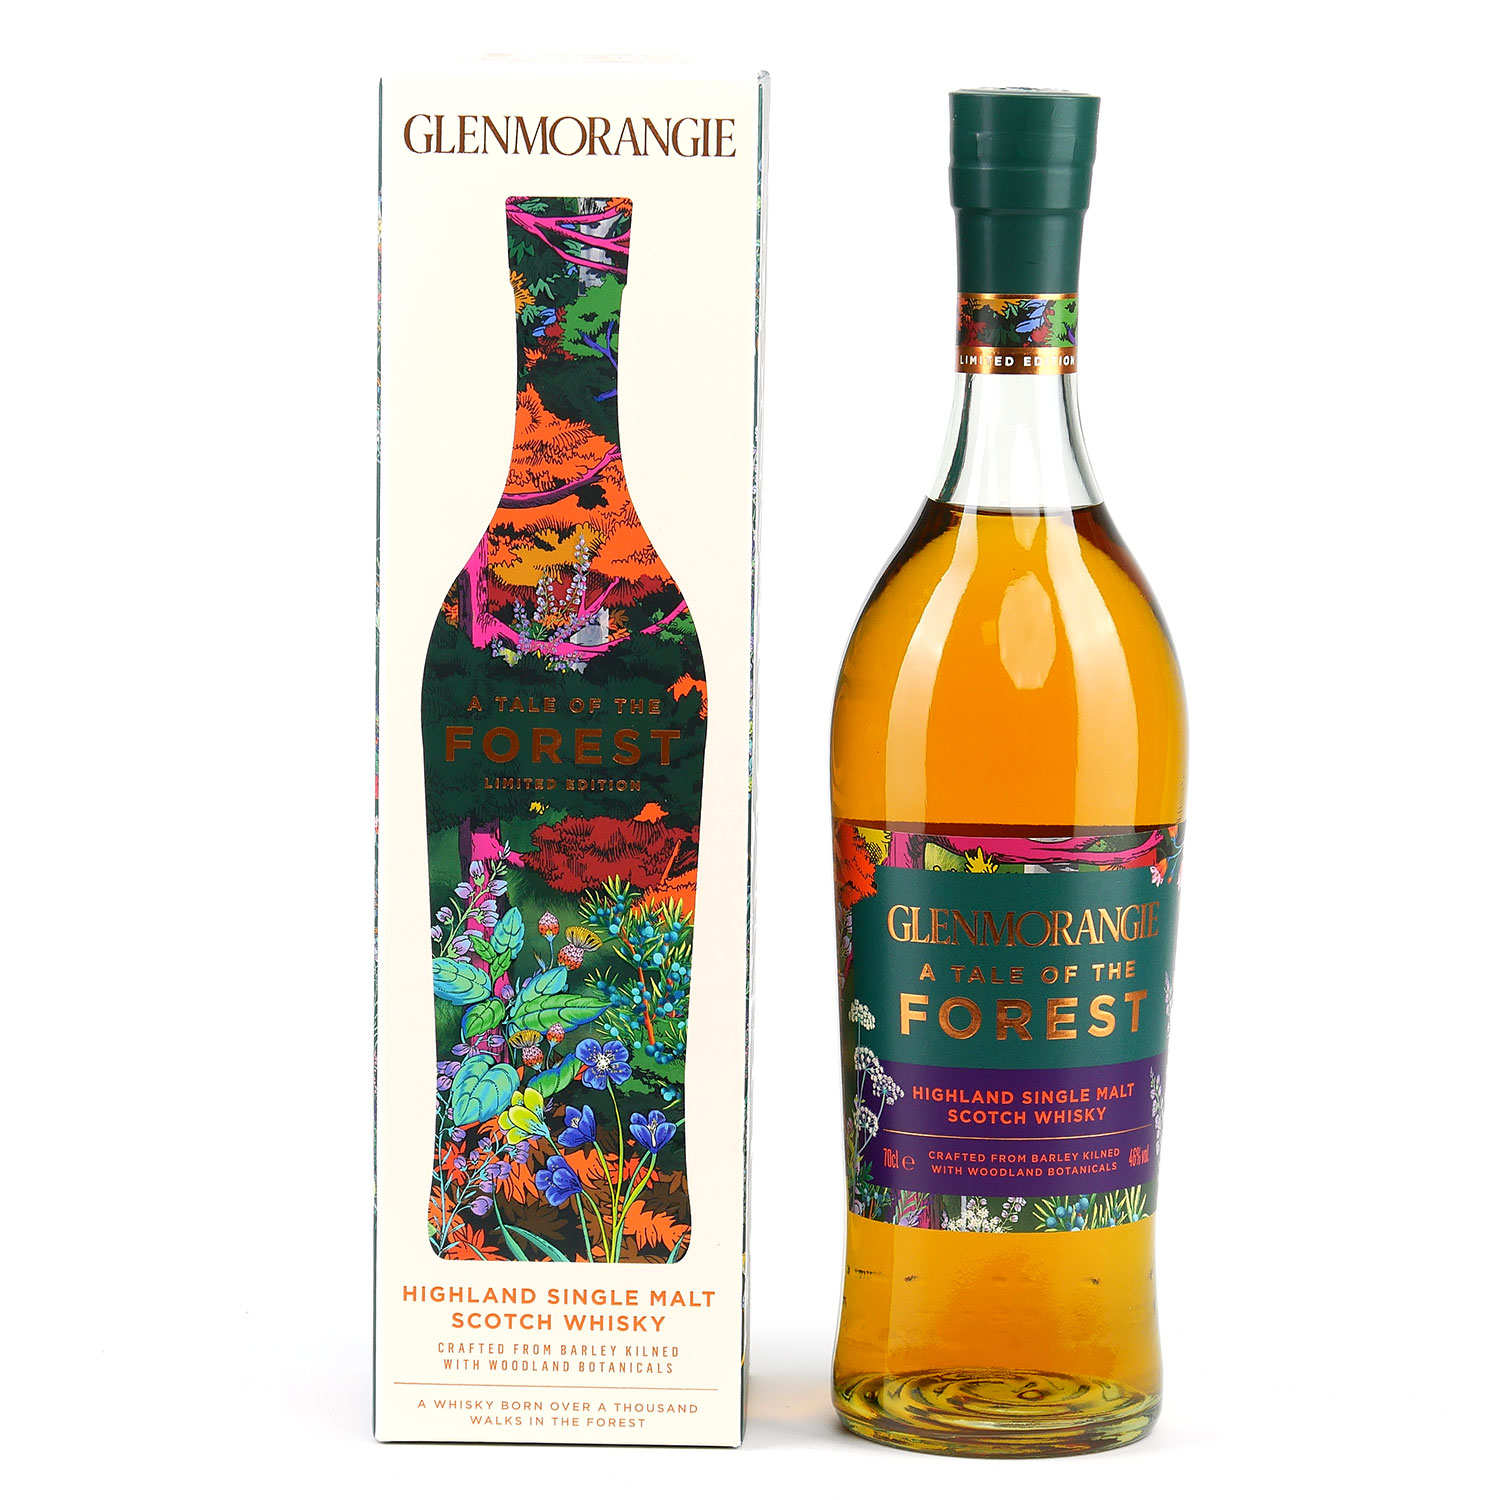 Glenmorangie Limited Edition "A Tale of The Forest" 46 Glenmorangie